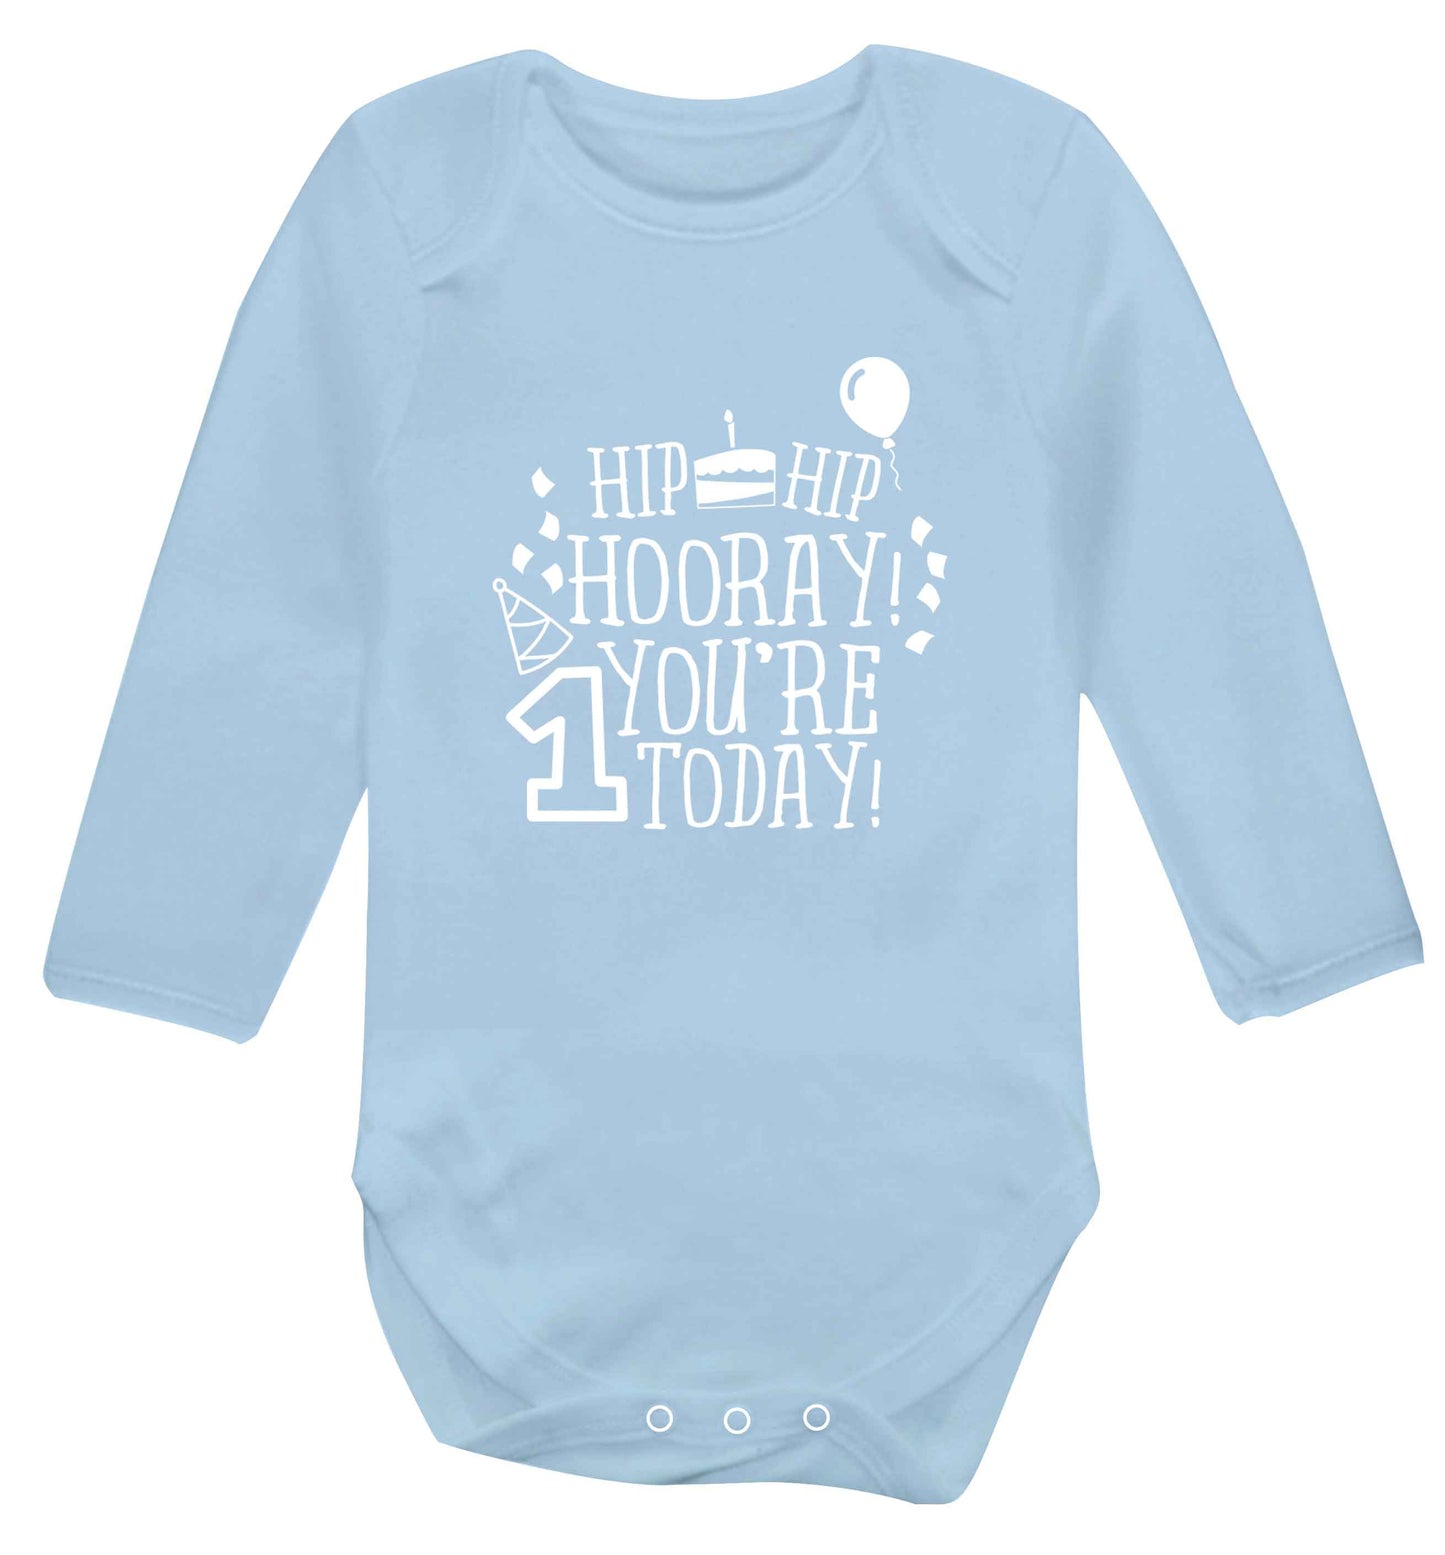 You're one today baby vest long sleeved pale blue 6-12 months